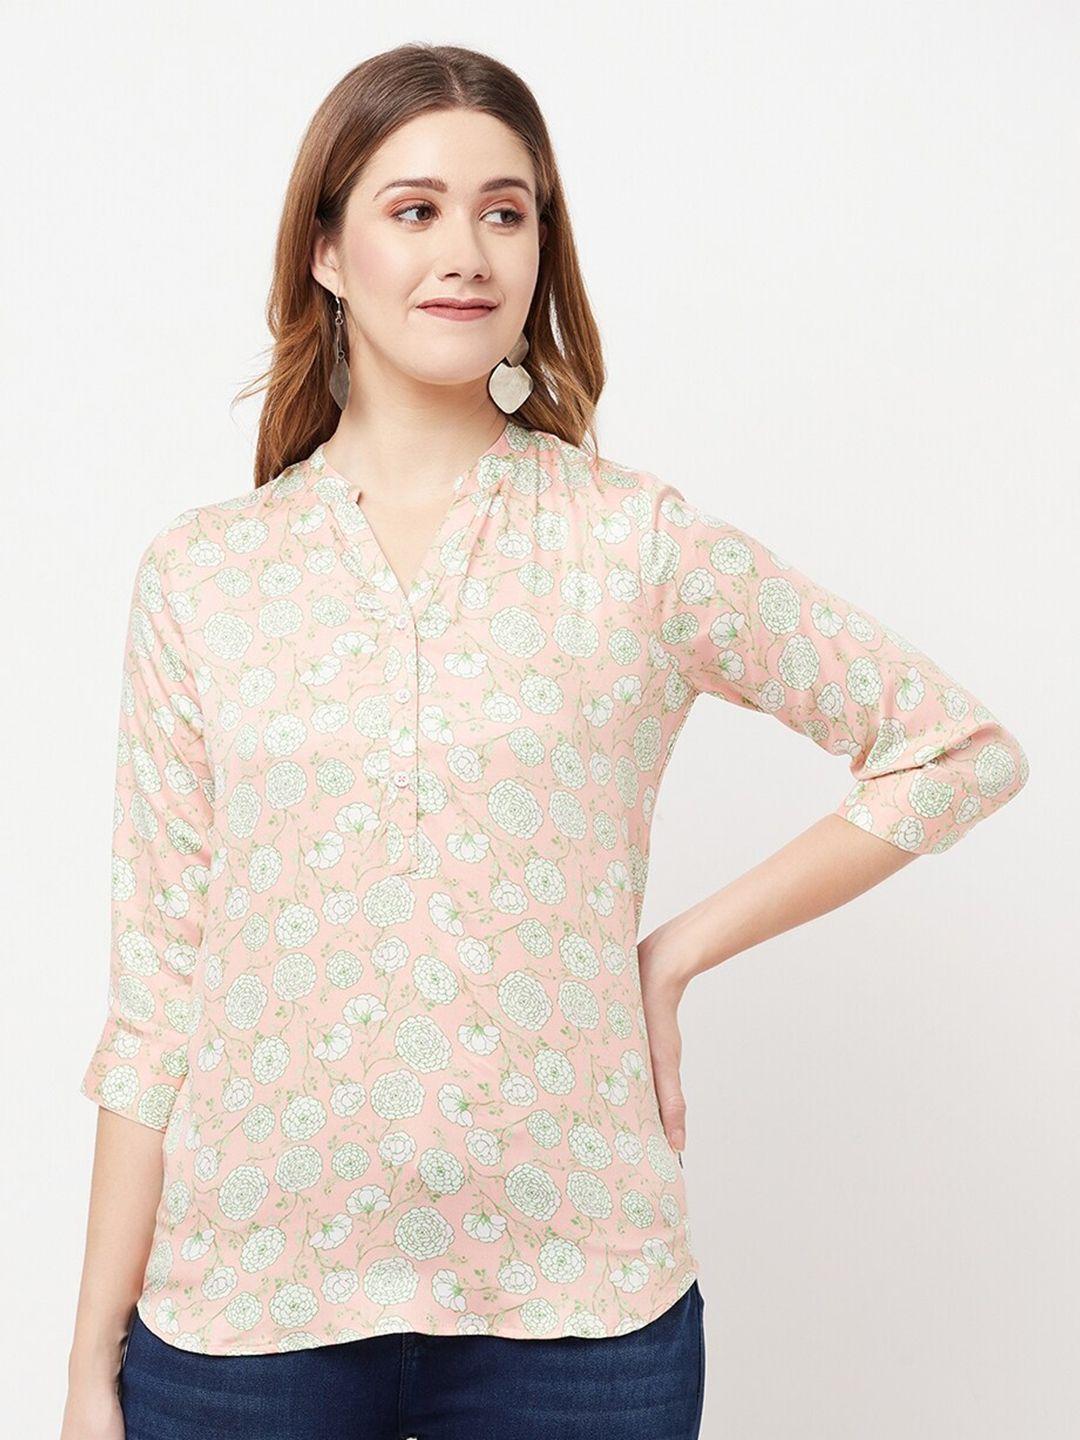 crimsoune club pink & green floral printed shirt style top